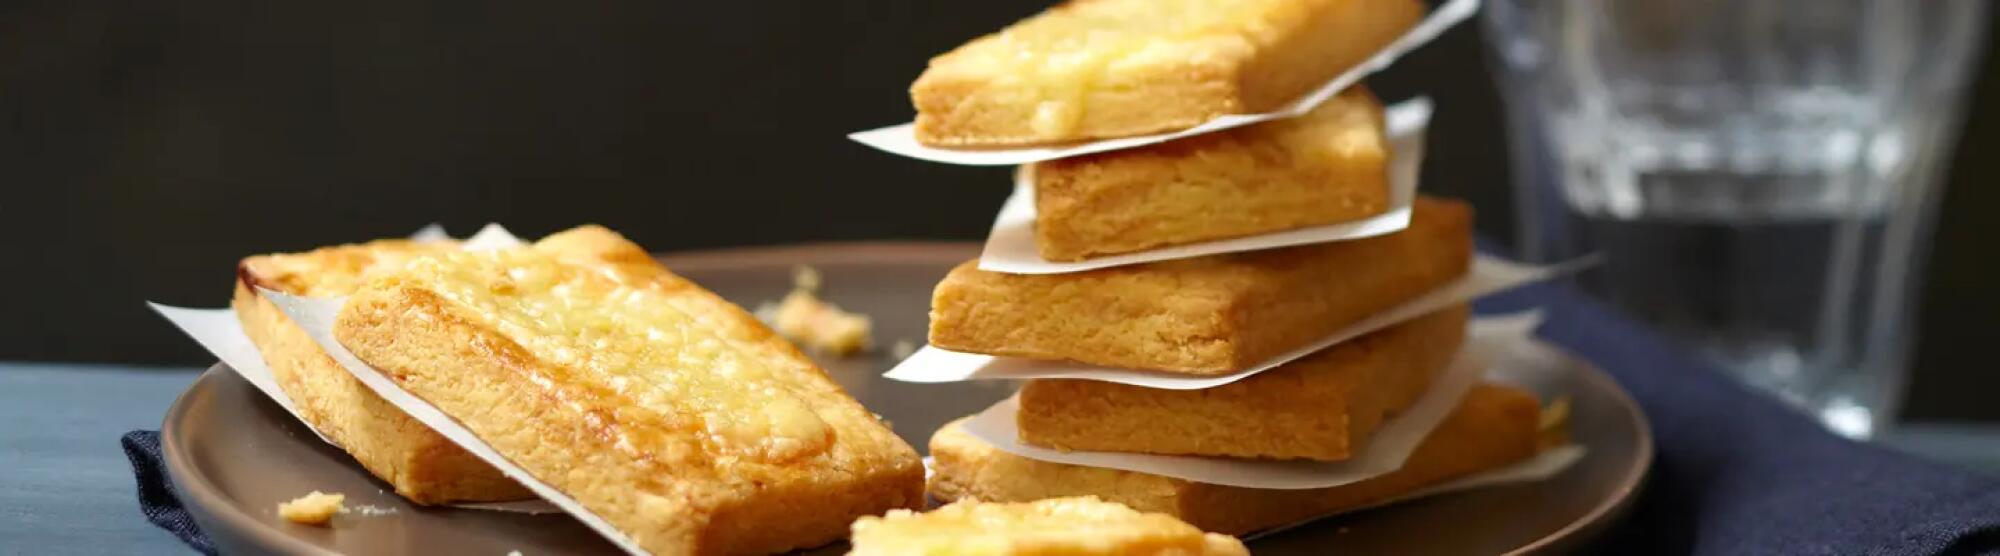 Recette : Biscuits au fromage